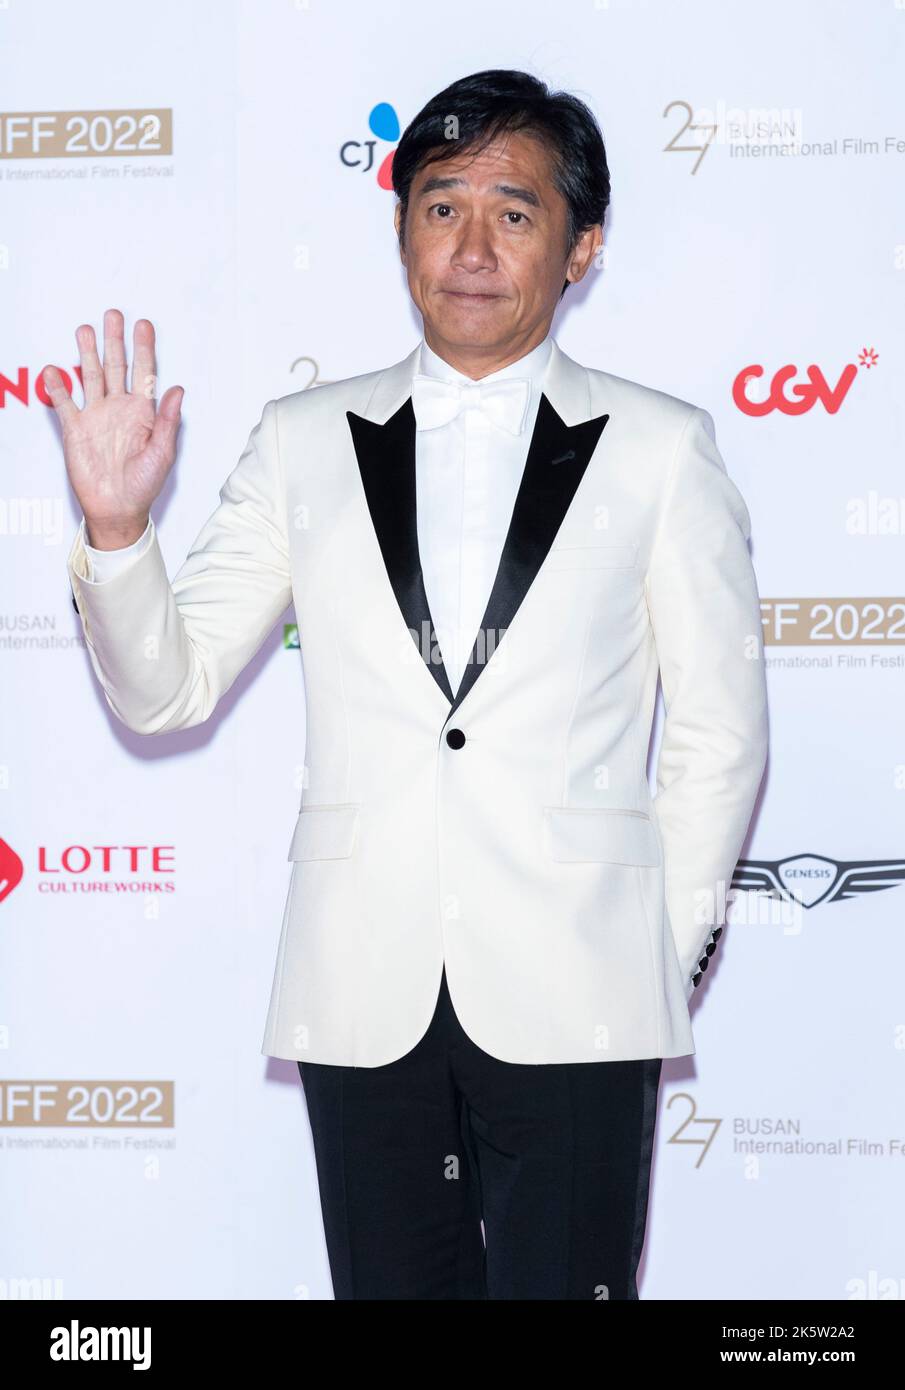 Busan, South Korea. 5th Oct, 2022. Tony Leung Chiu Wai, arrives red carpet at the opening ceremony during the 27th Busan International Film Festival at Busan Cinema Center in Busan, South Korea on October 5, 2022. (Photo by: Lee Young-ho/Sipa USA) Credit: Sipa USA/Alamy Live News Stock Photo